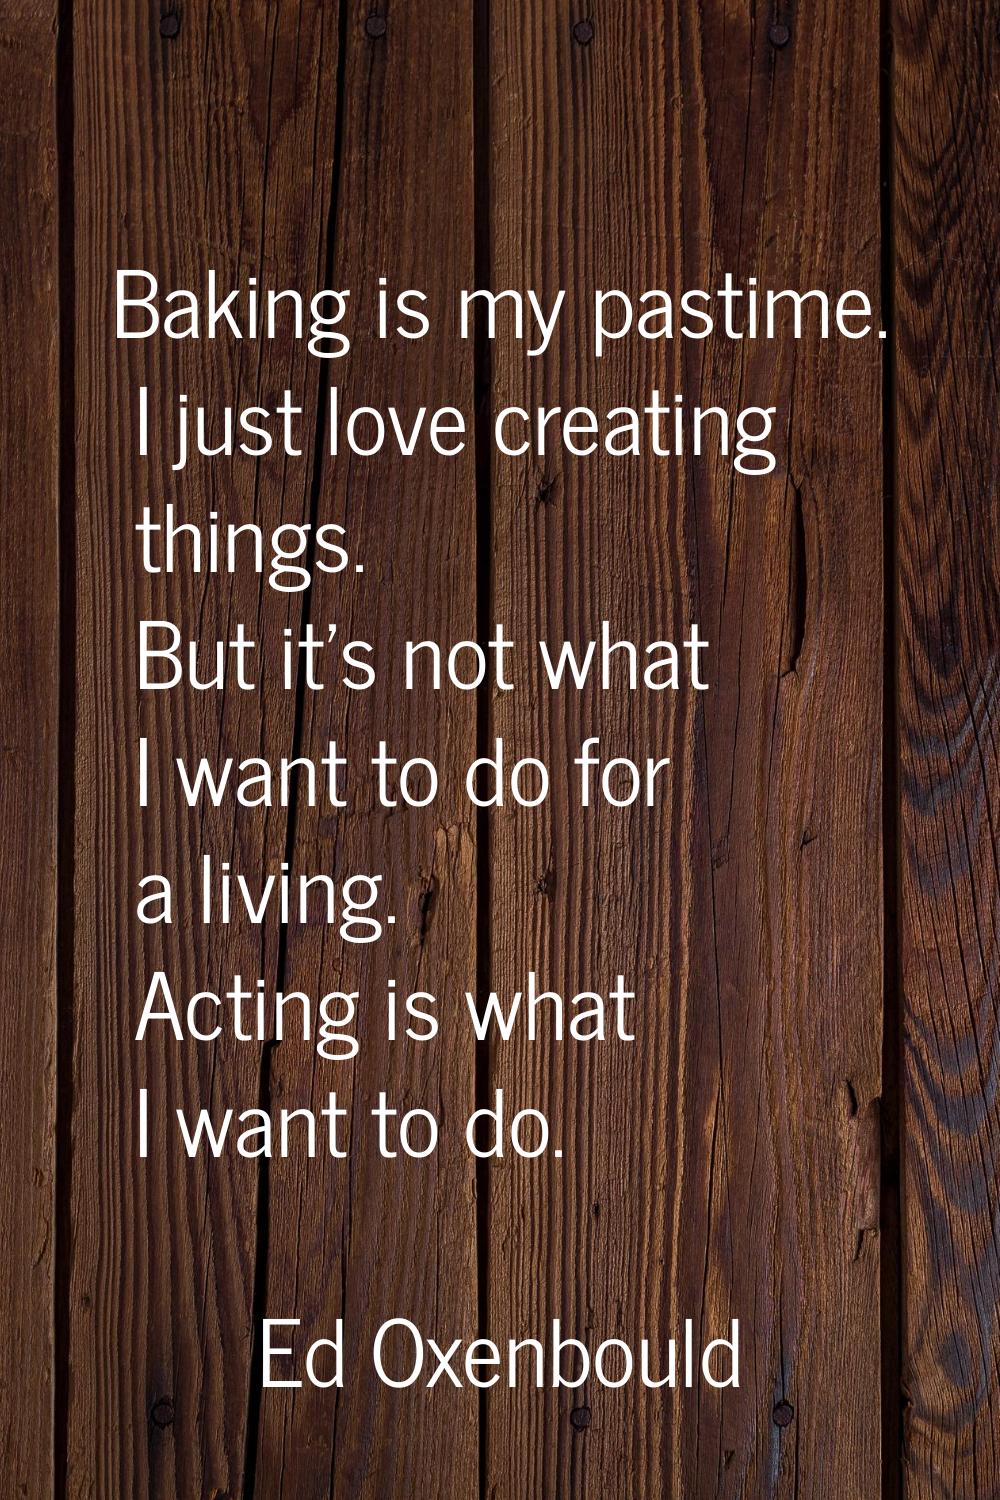 Baking is my pastime. I just love creating things. But it's not what I want to do for a living. Act